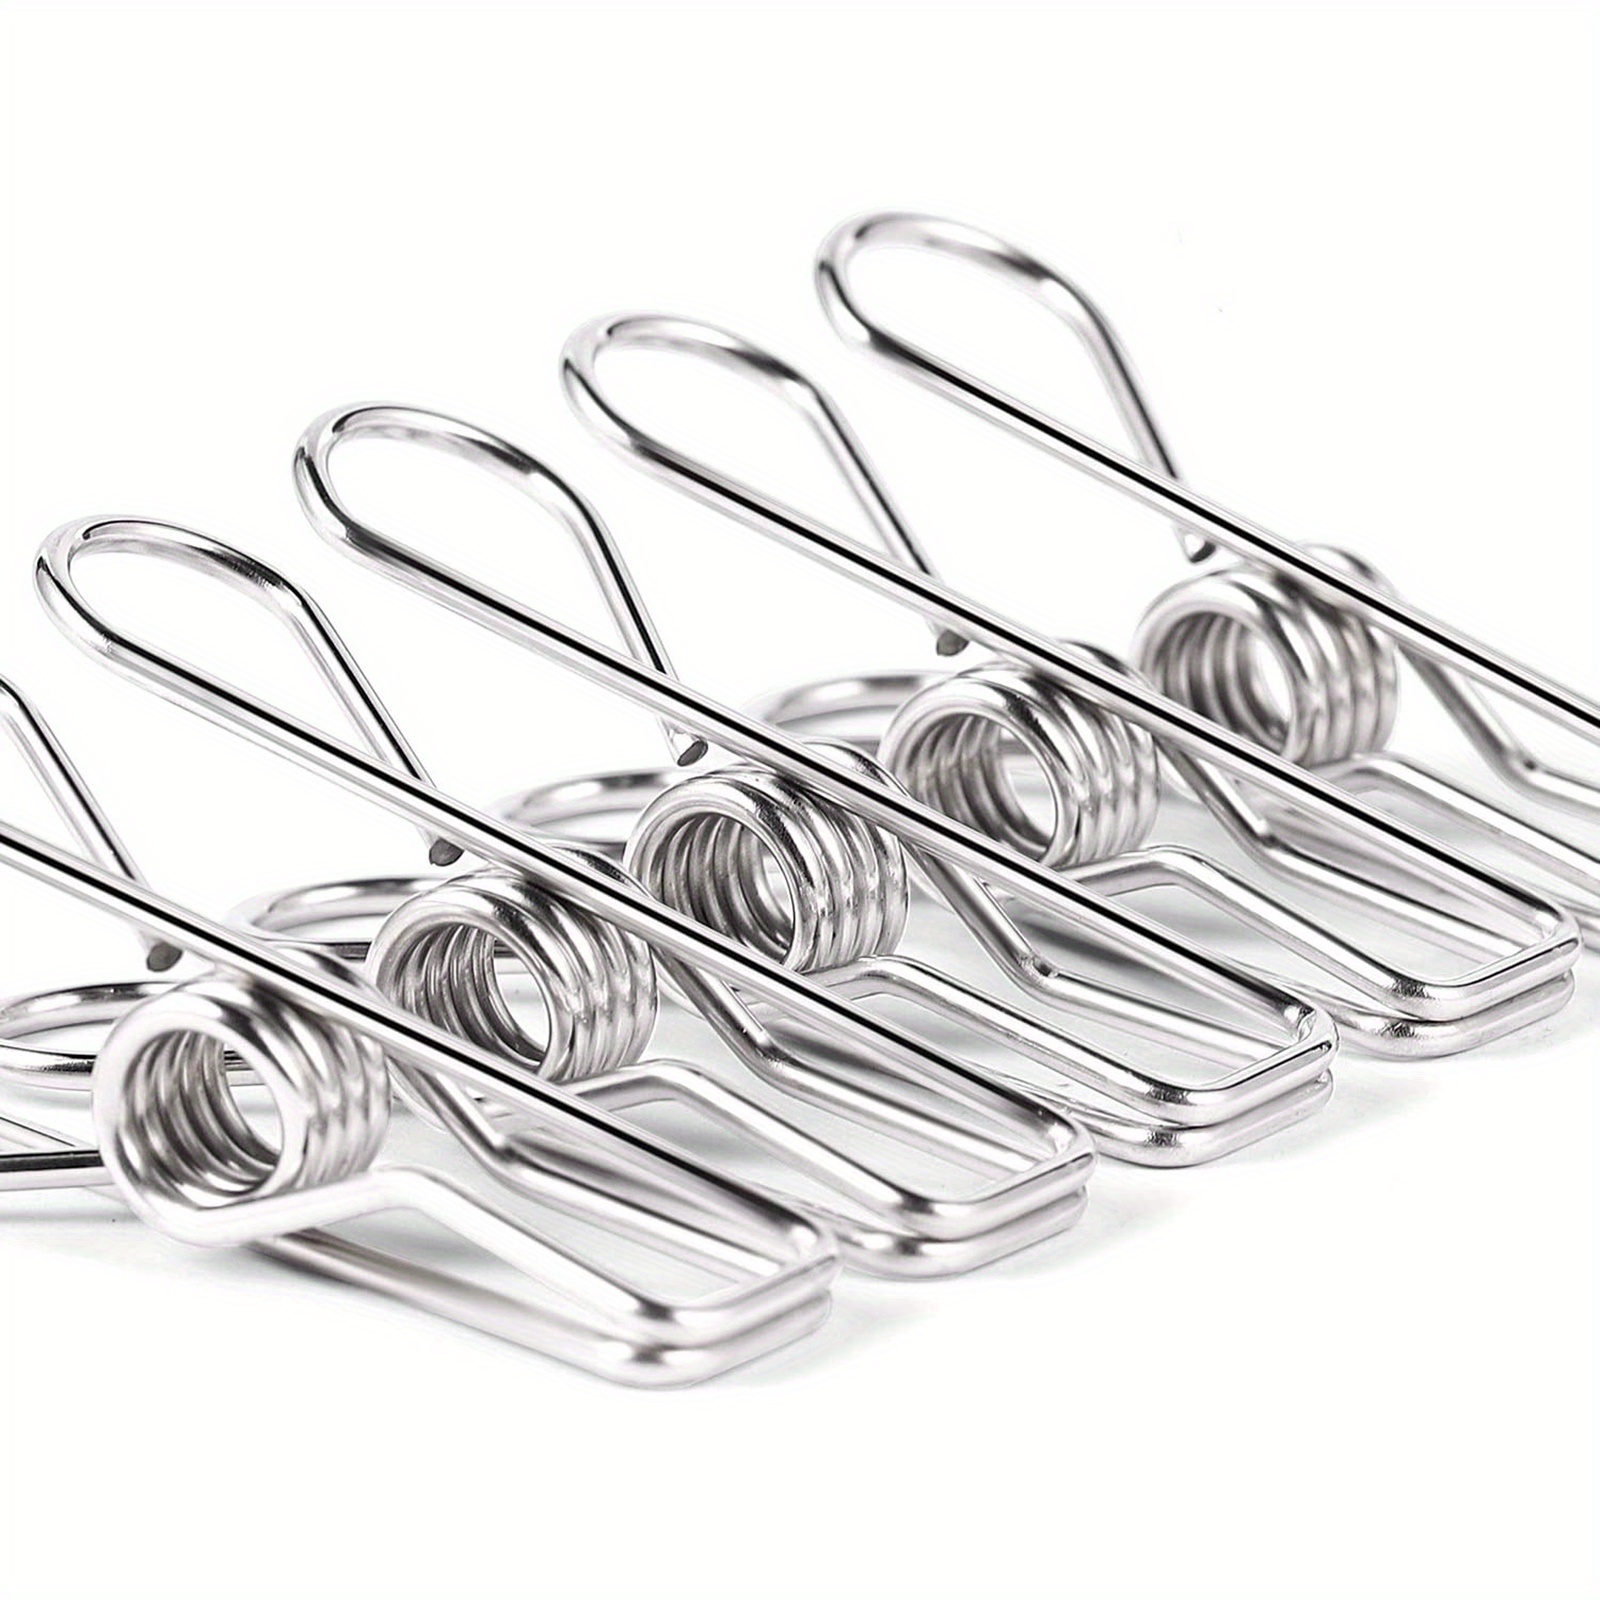 Heavy Duty Clothes Pins For Hanging Clothes Stainless Steel Clothespins For Landry Metal